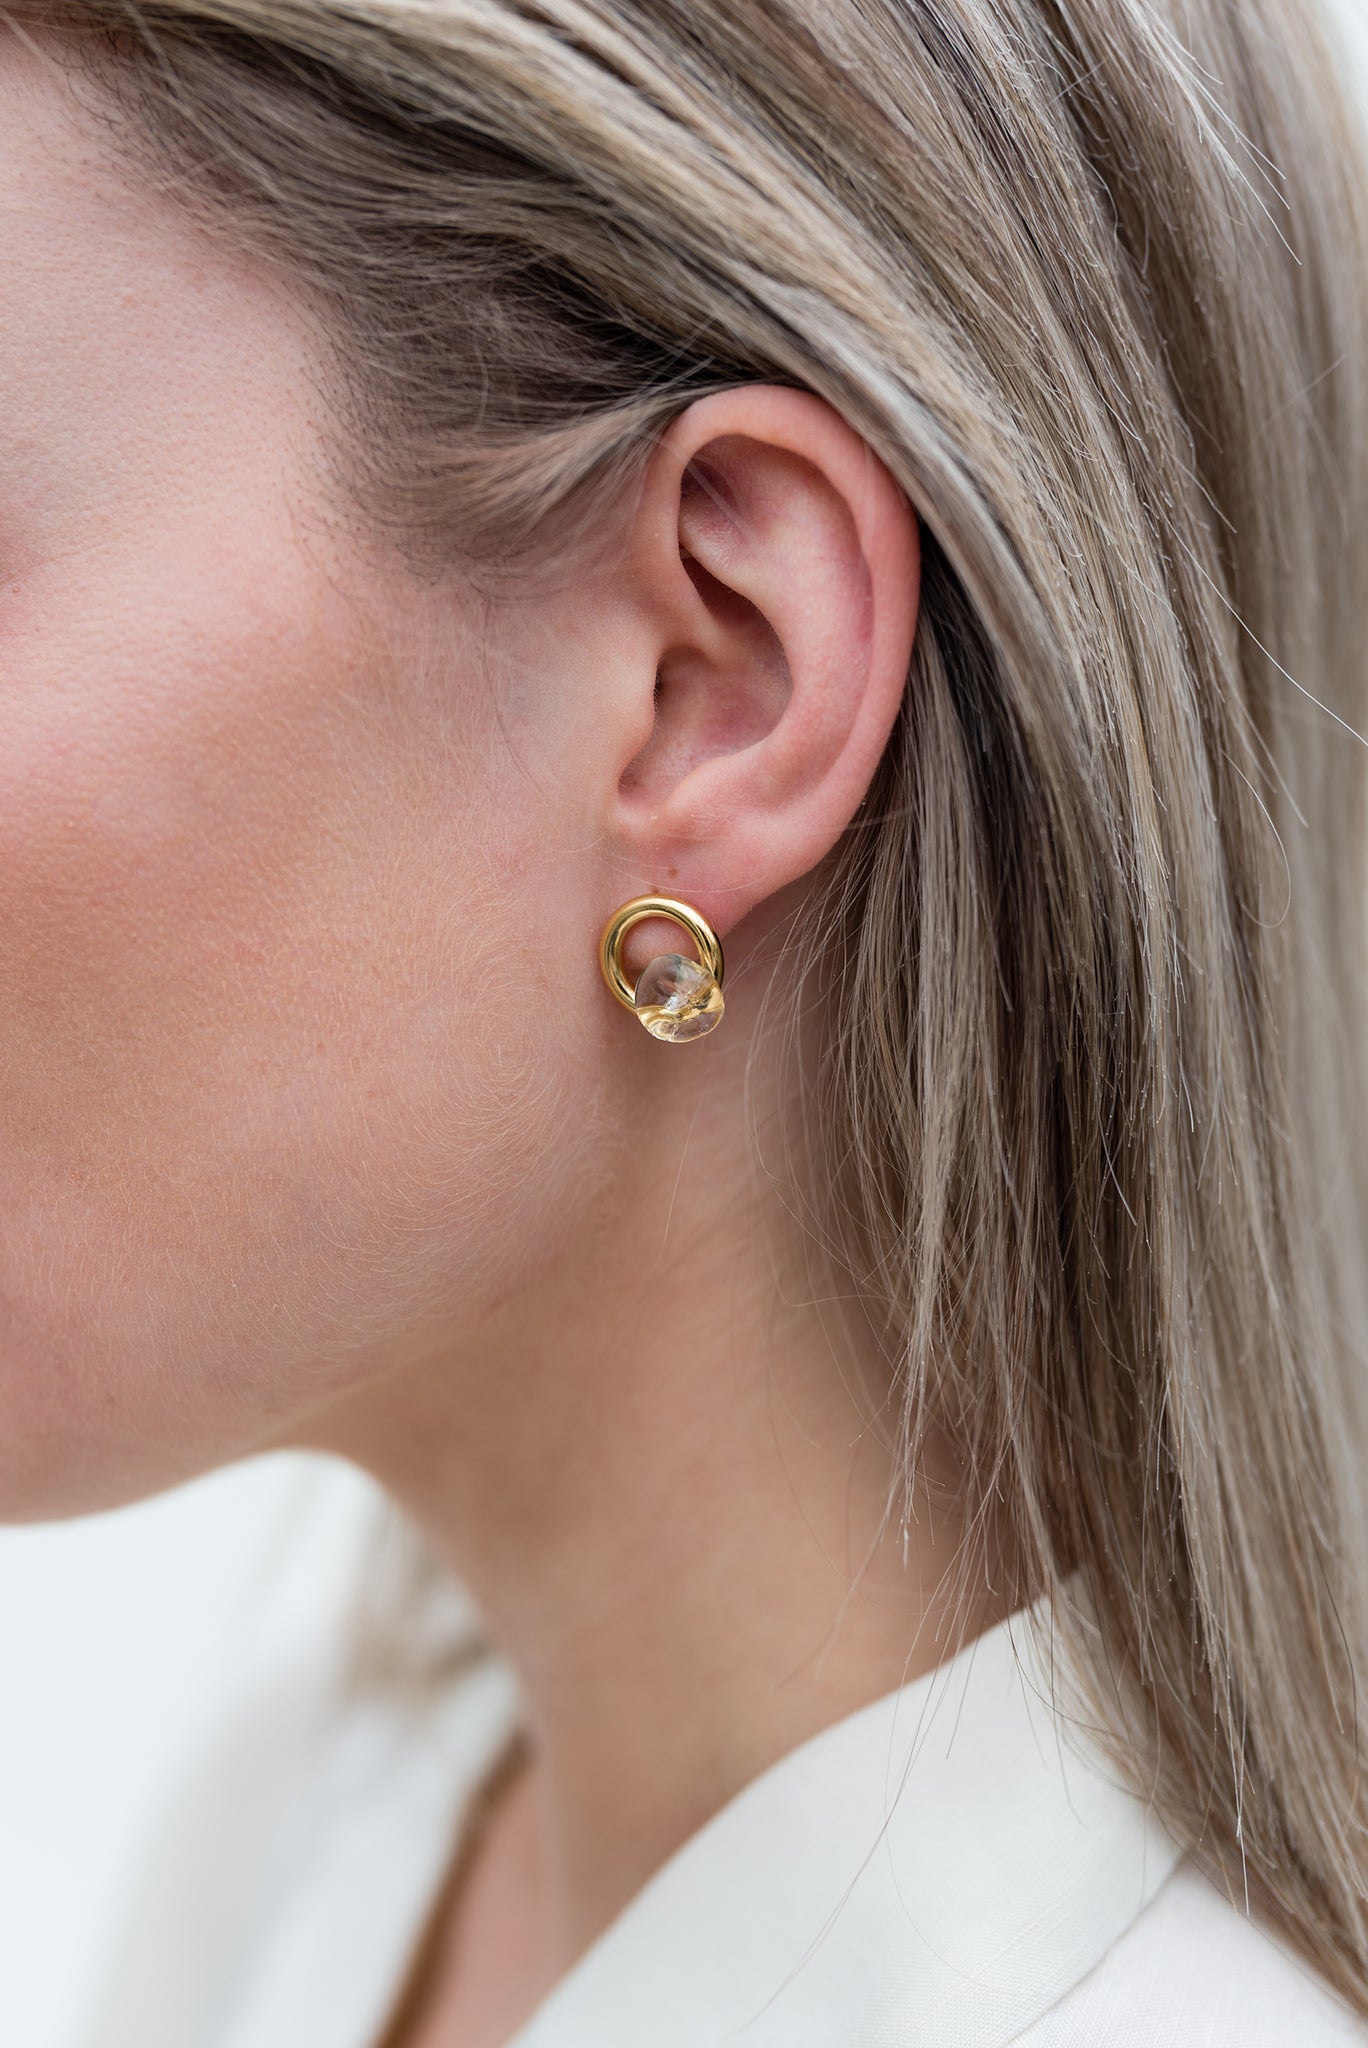 Model wearing ethical recycled silver gold plated earrings